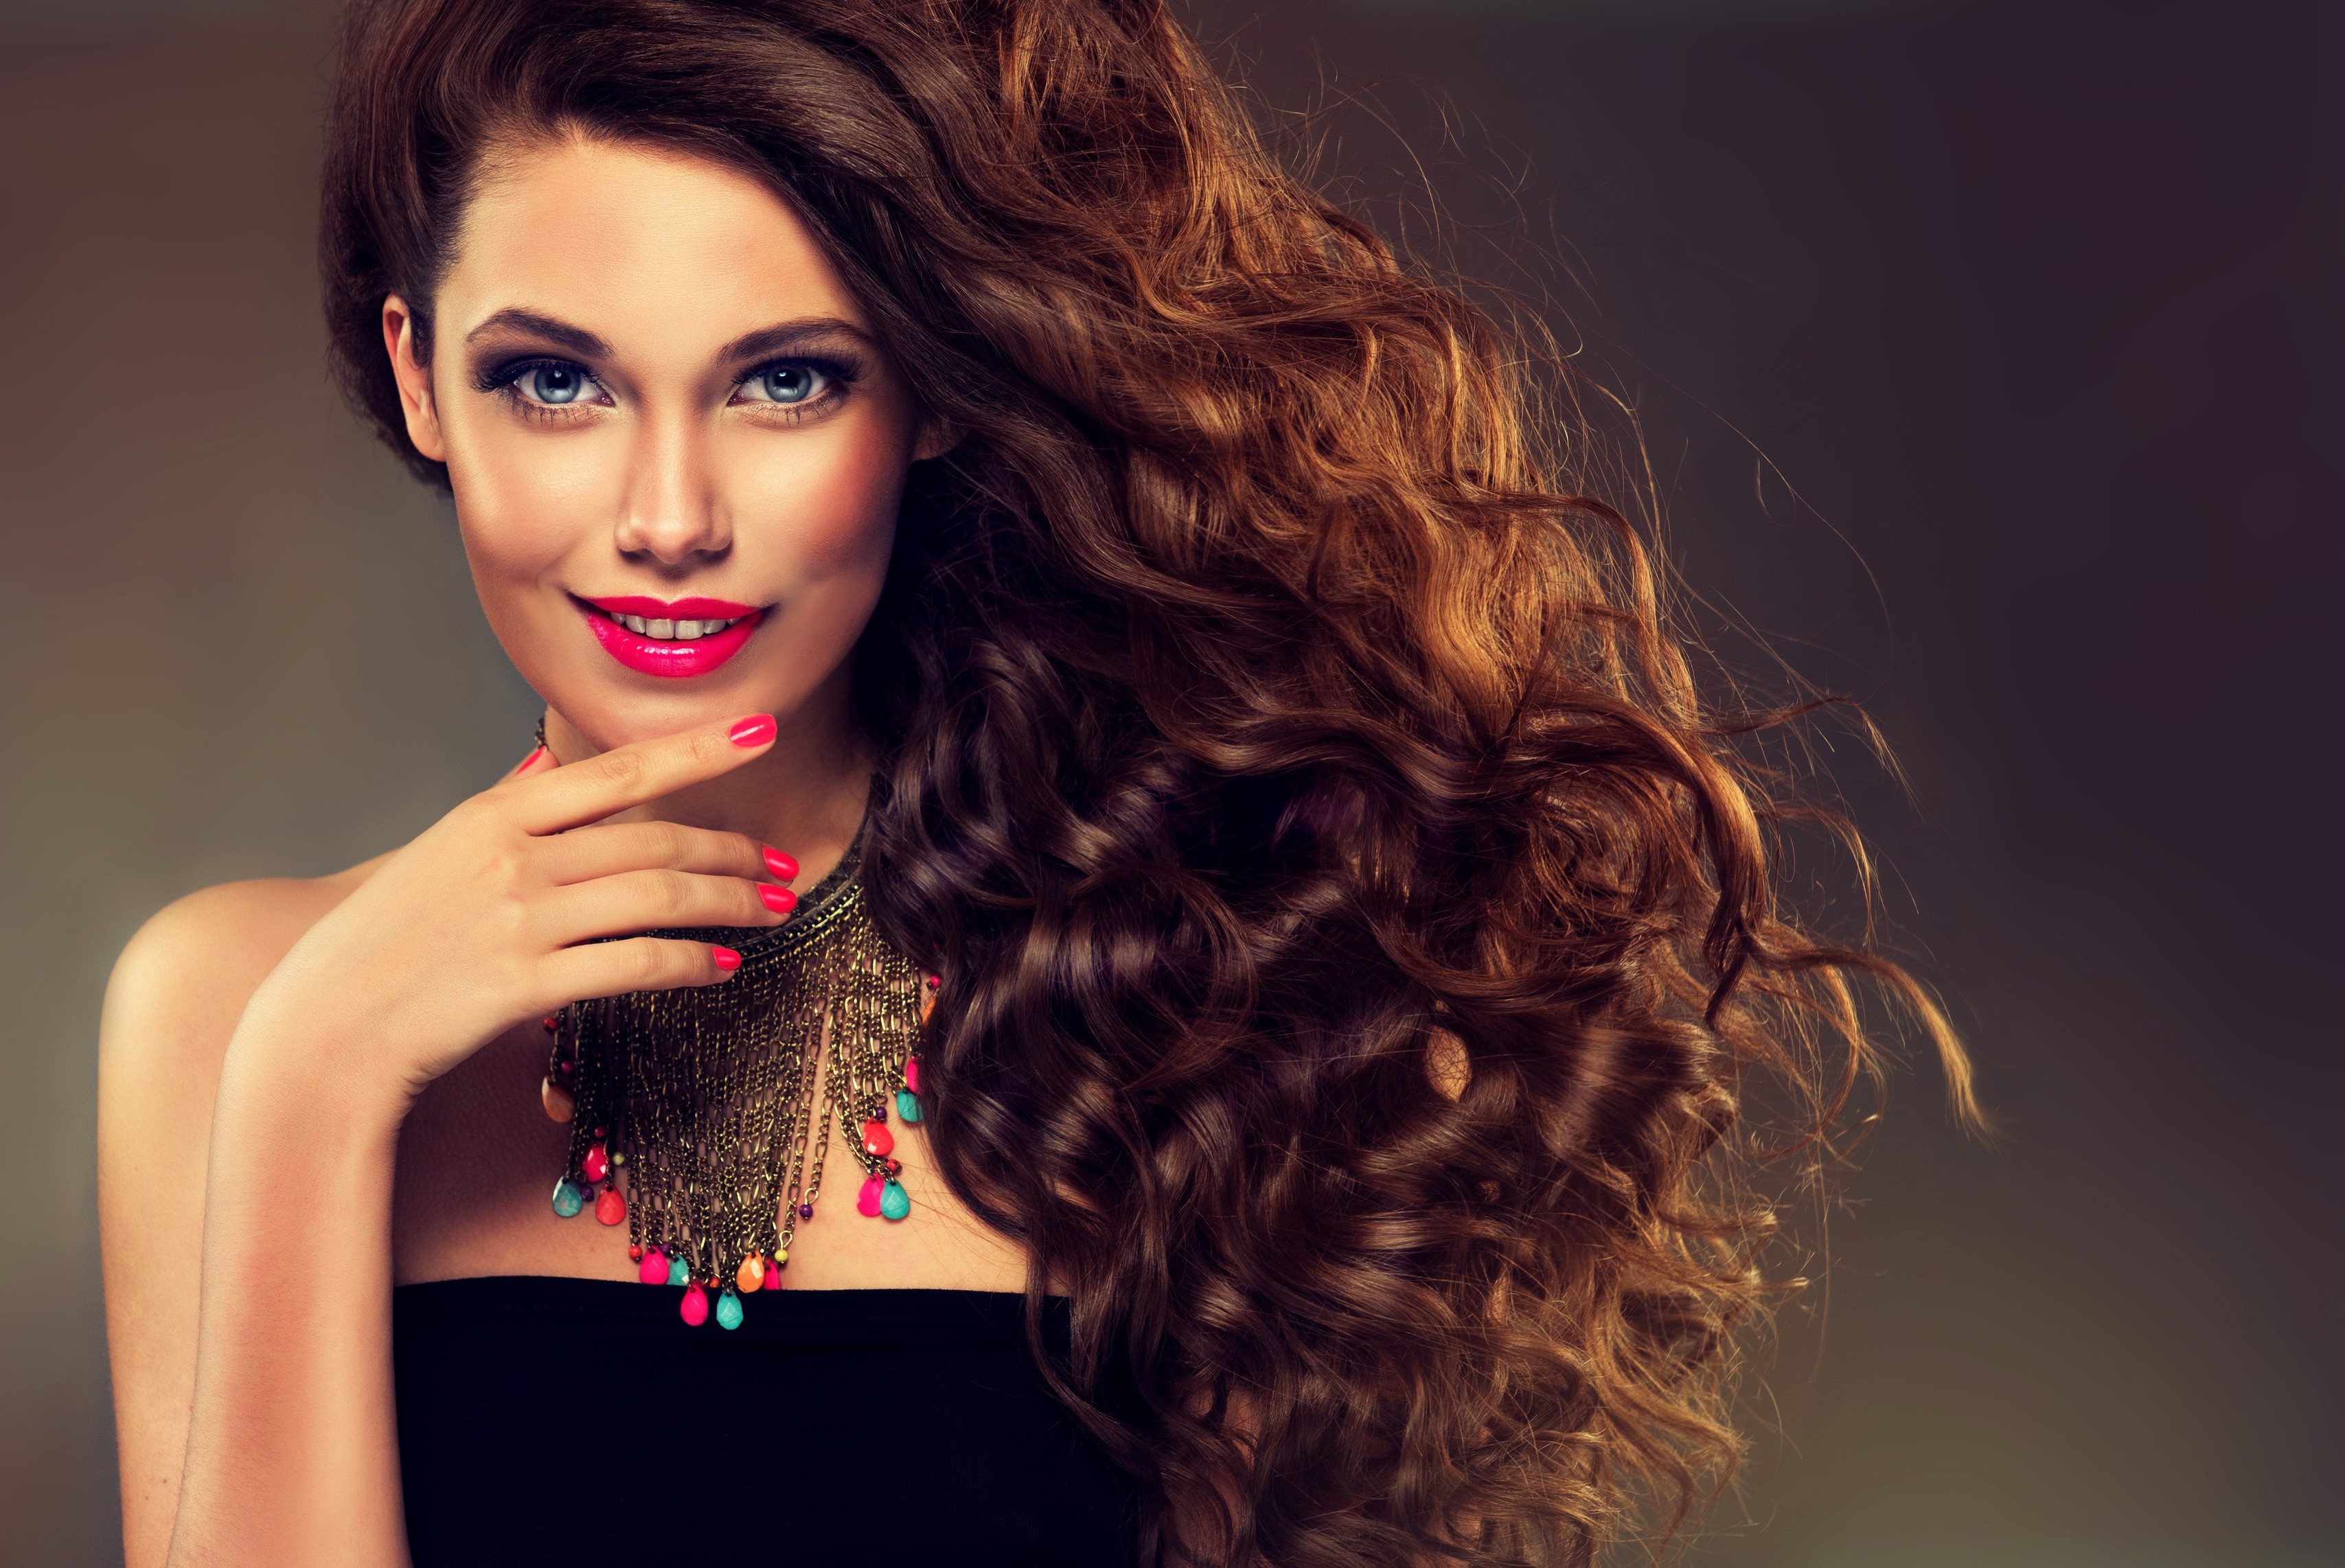 women, Long Hair, Brunette, Looking At Viewer, Curly Hair, Face, Eyes, Makeup, Simple Background, Smiling Wallpaper